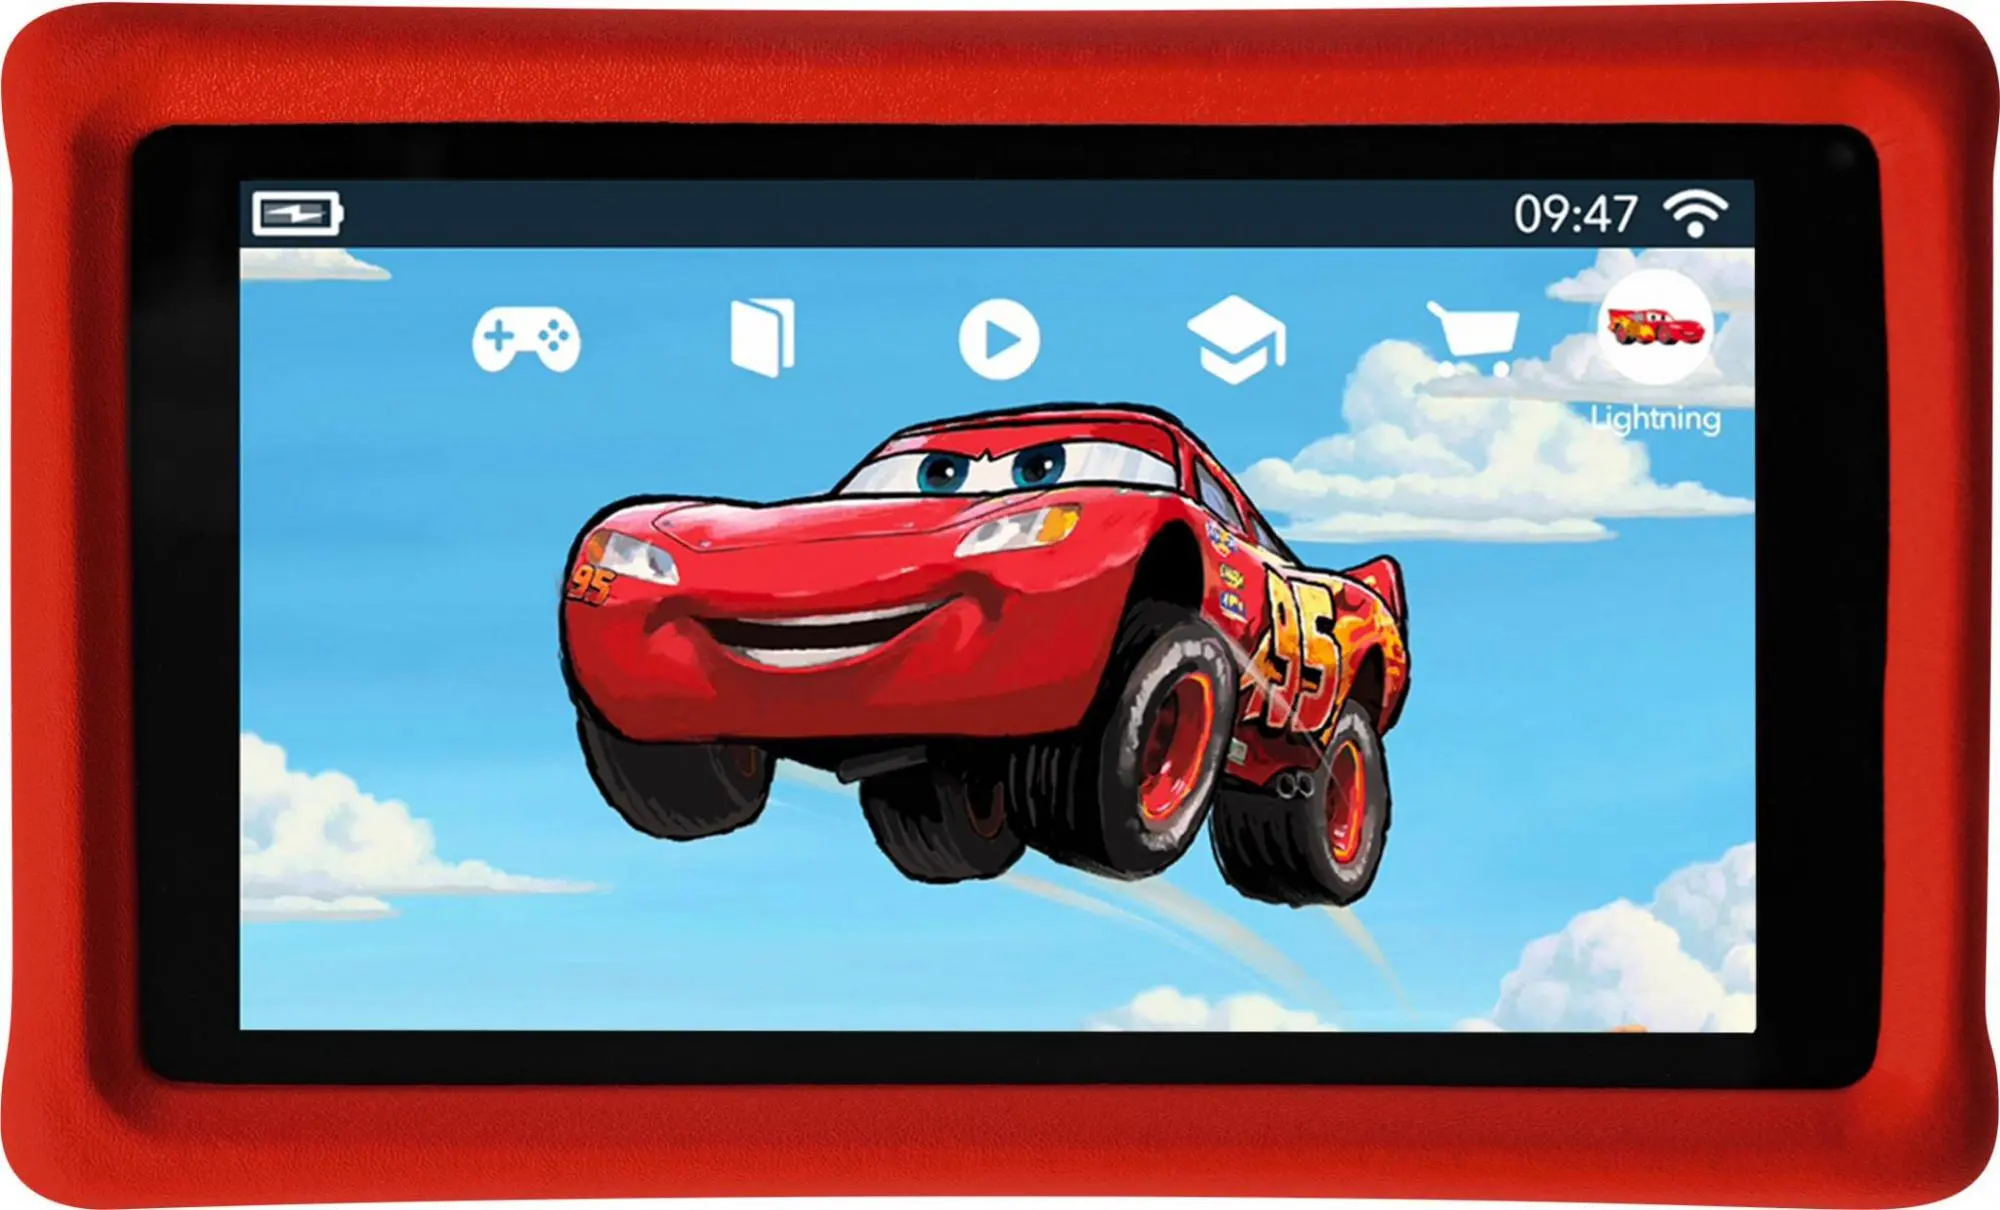 https://static.rcwilley.com/products/112525962/Pebble-Gear-Disney-Cars-7-Kid-s-Tablet-rcwilley-image1.webp